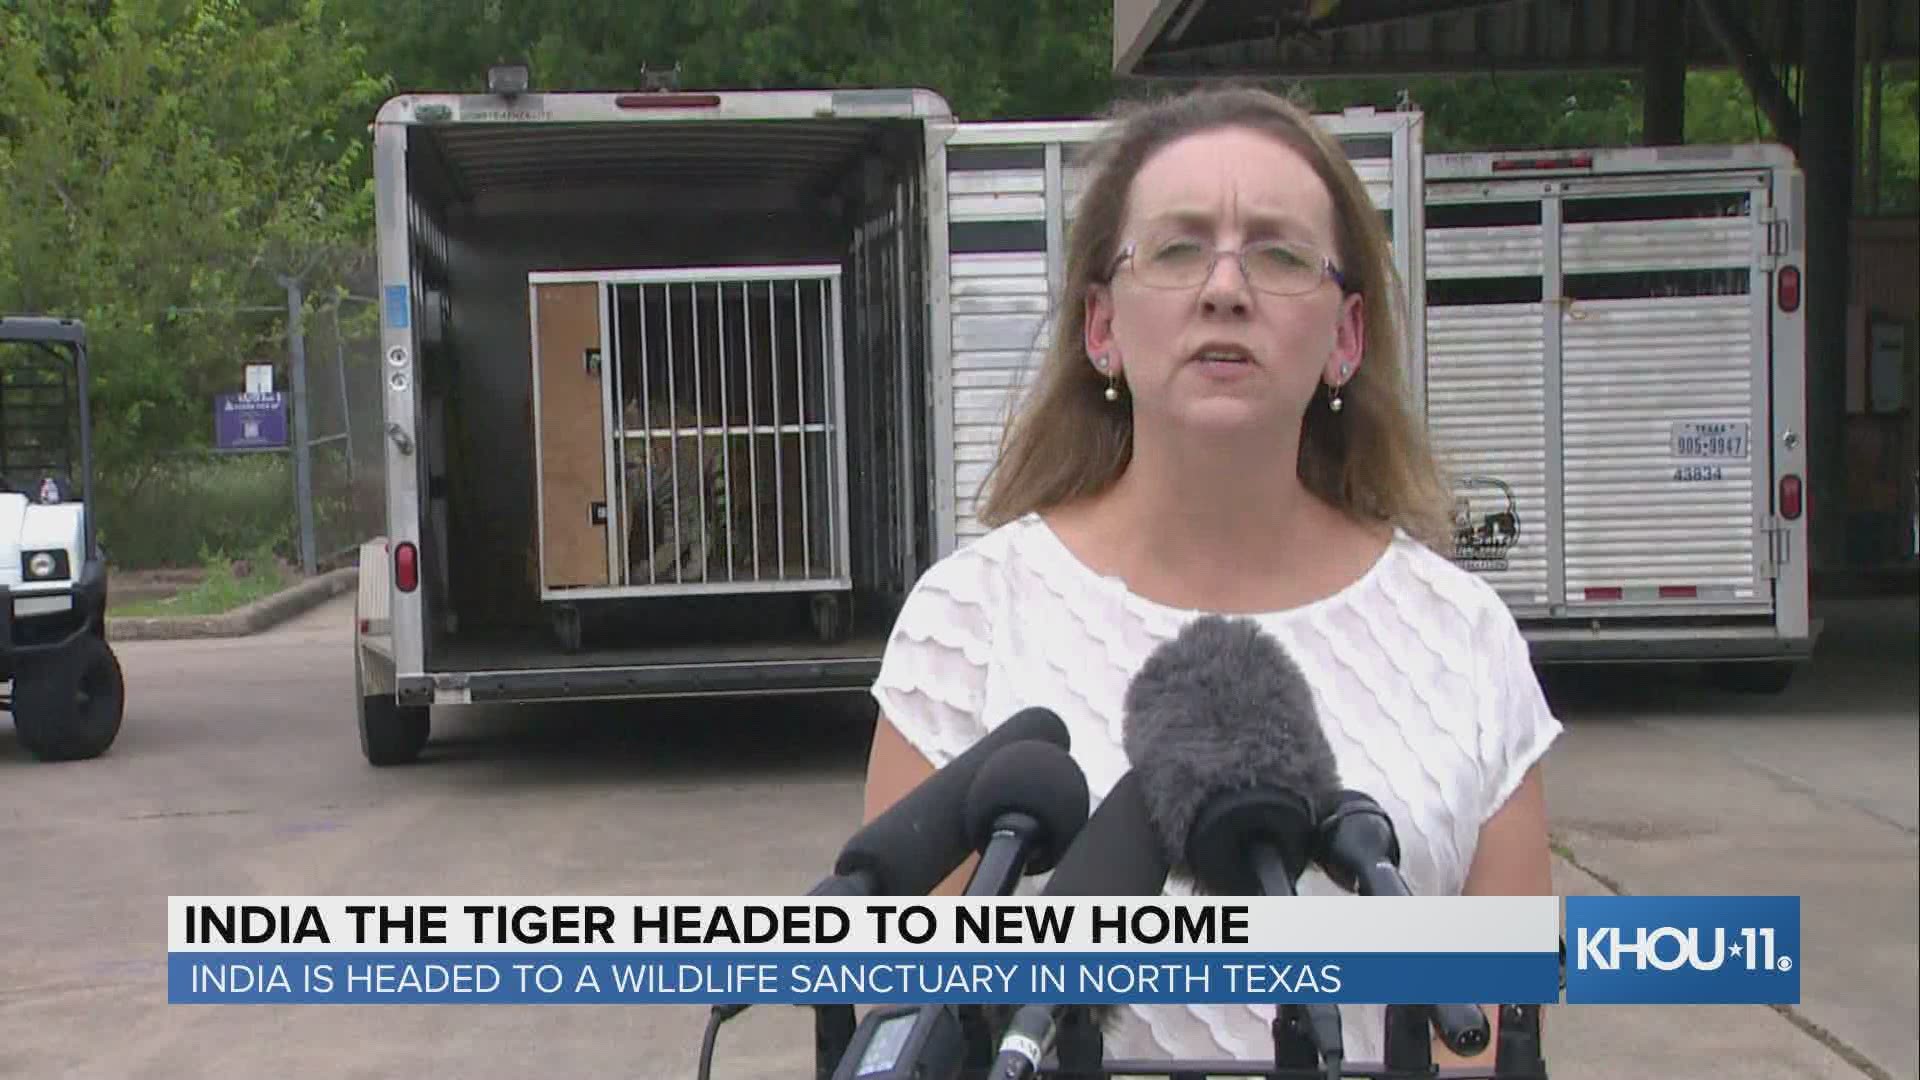 India the tiger is headed to the Cleveland Amory Black Beauty Ranch in Murchison, Texas, which is about three hours away from Houston.